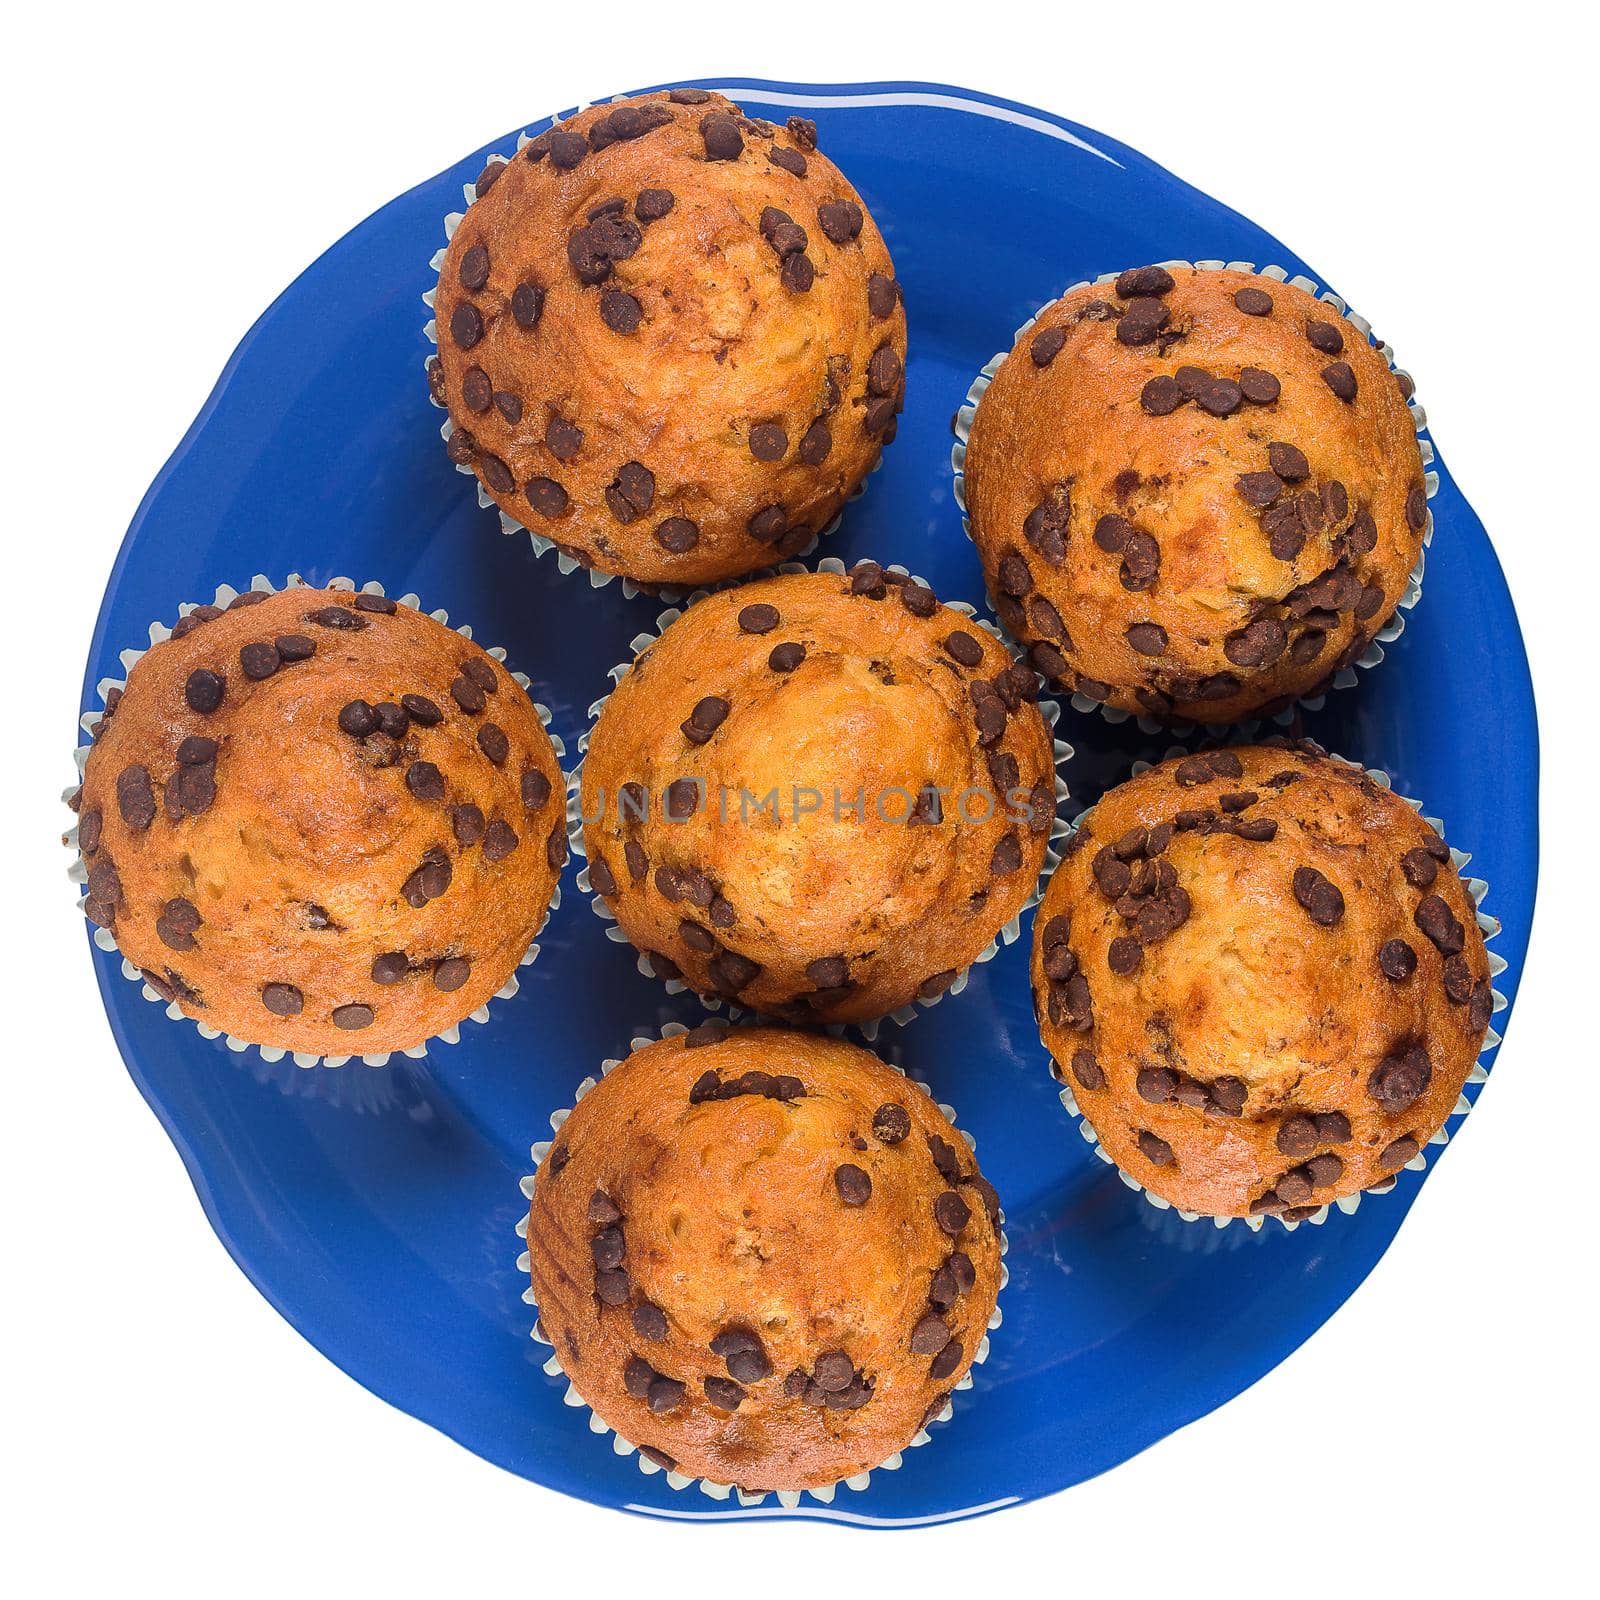 Muffins with chocolate chips on a ceramic plate isolated on white background.